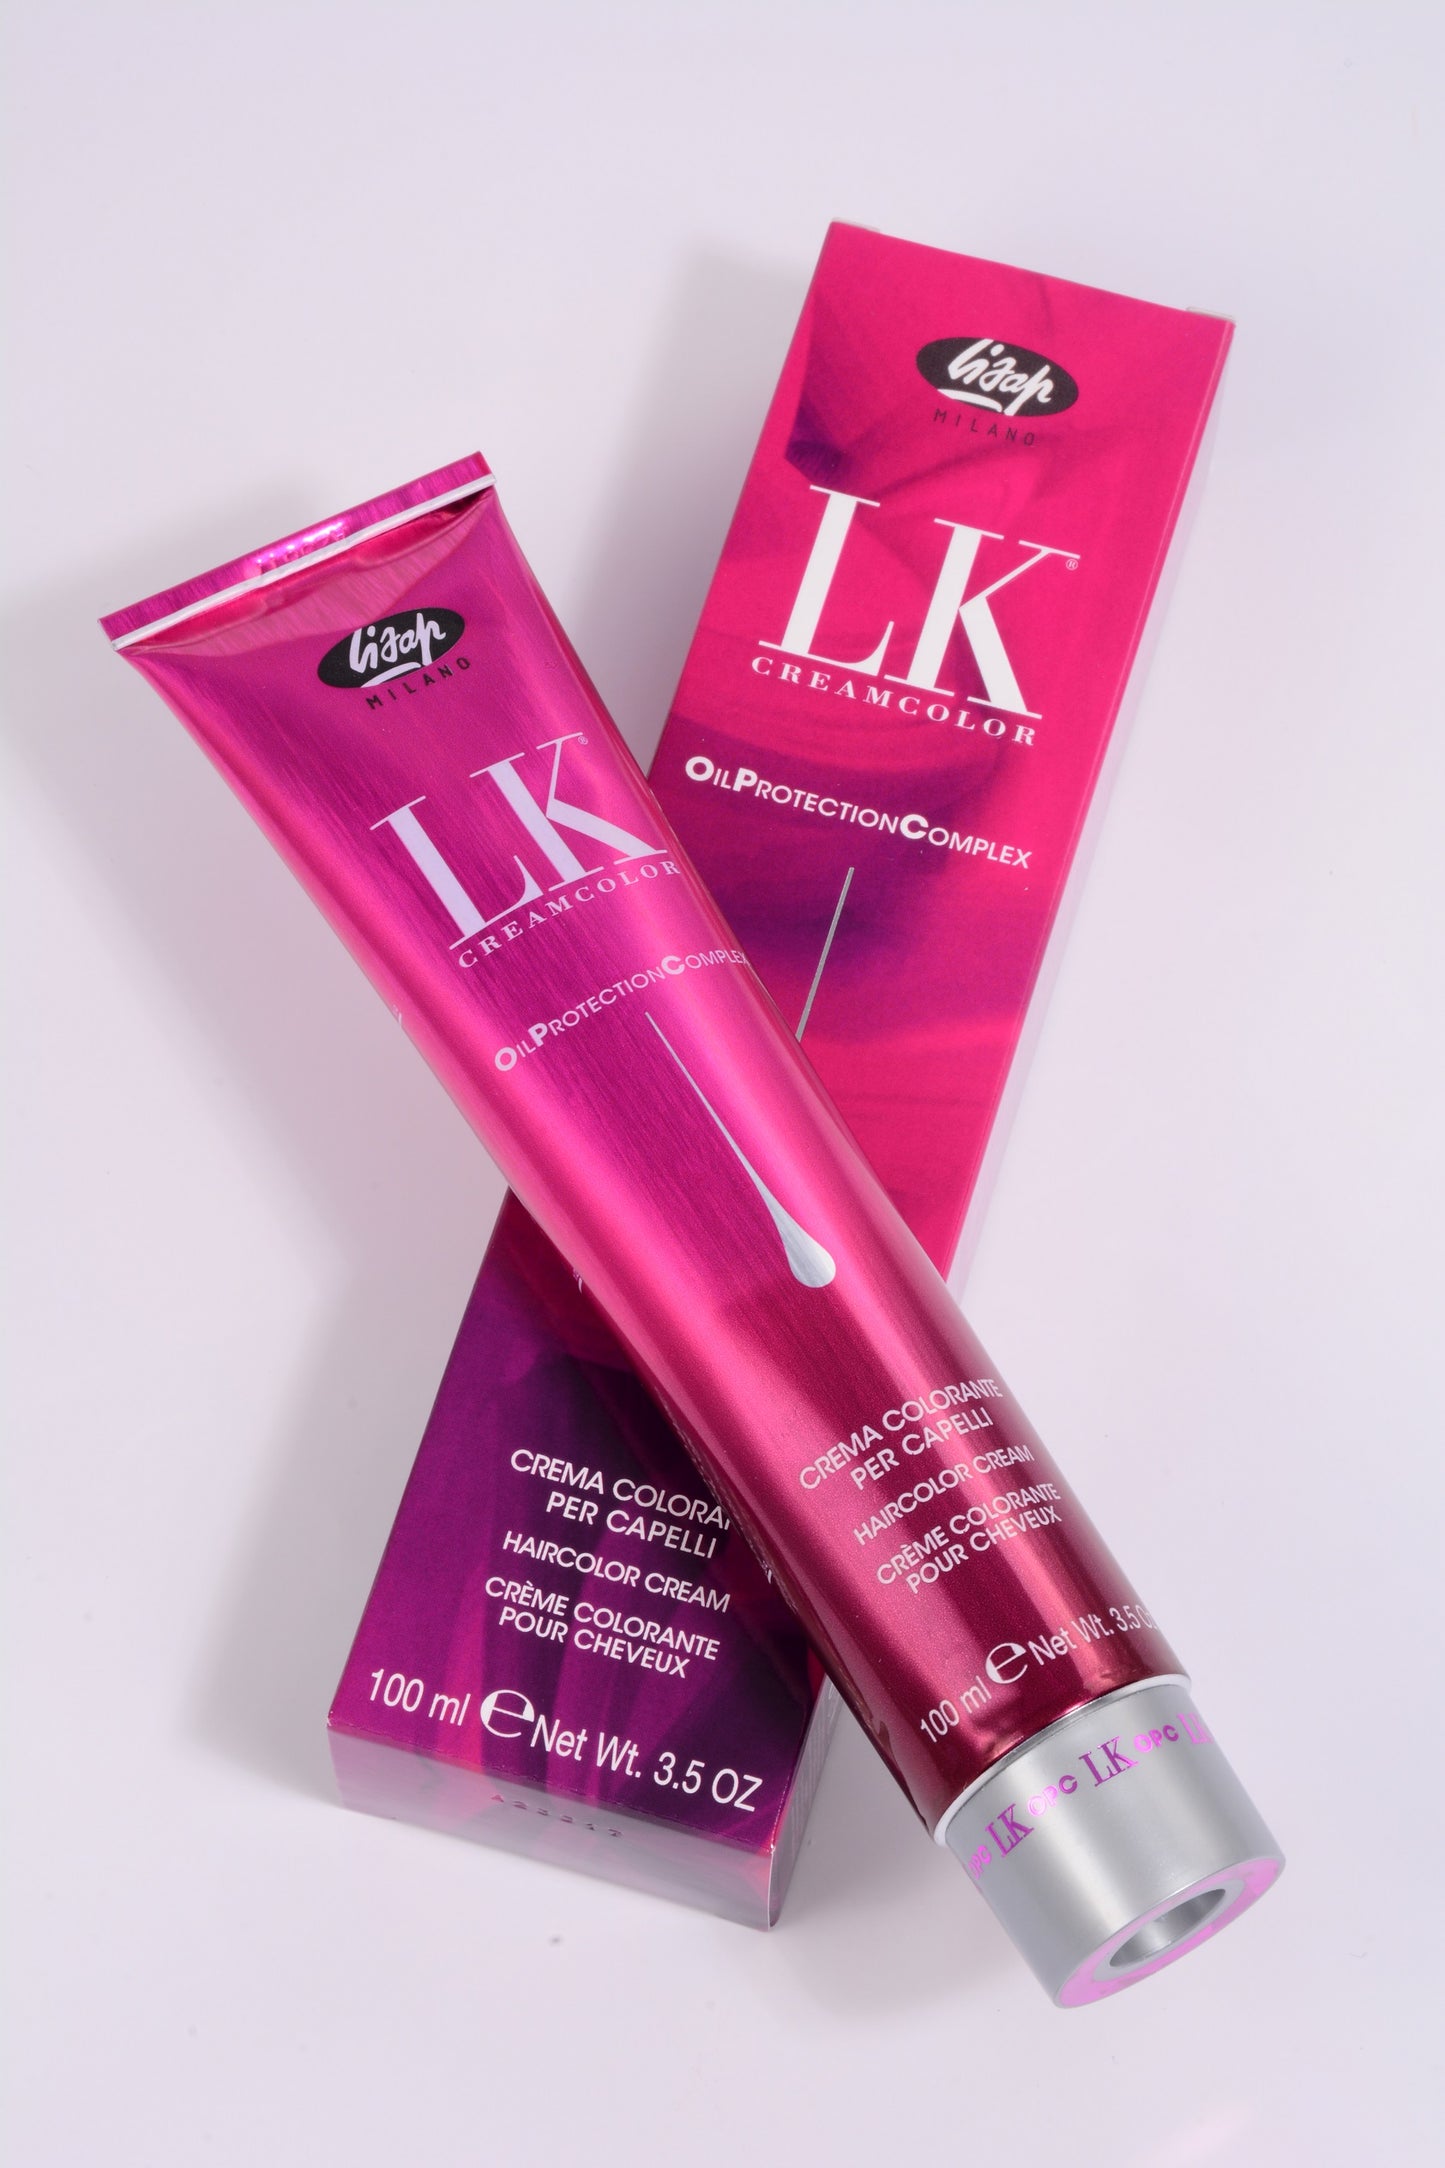 LK Creamcolor 7/71 Oil Protection Complex